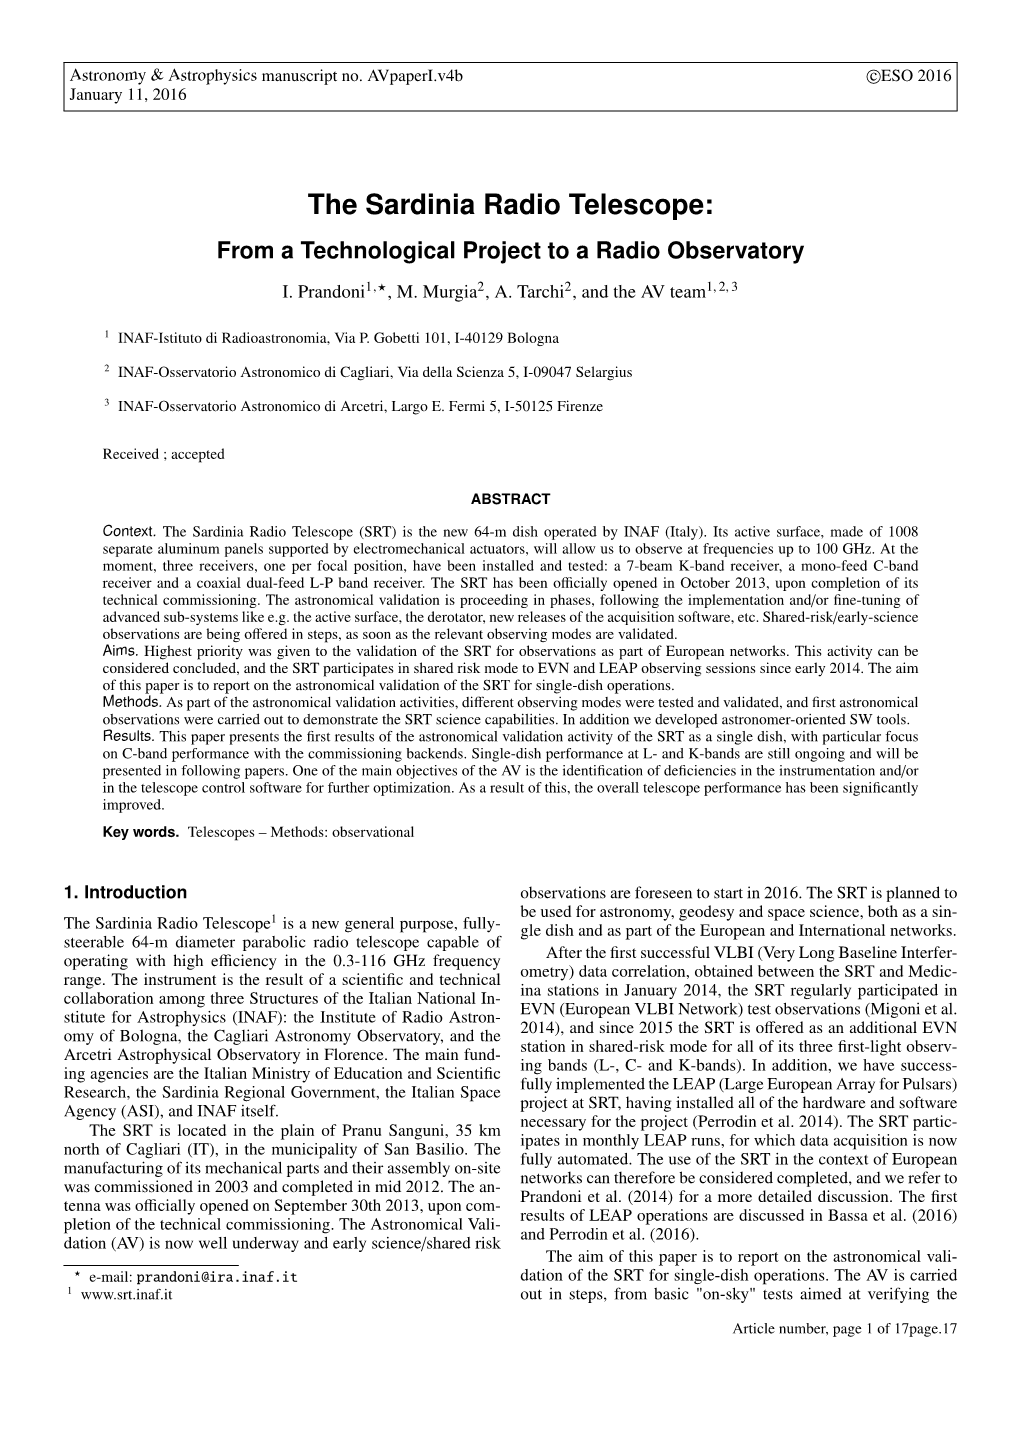 The Sardinia Radio Telescope: from a Technological Project to a Radio Observatory